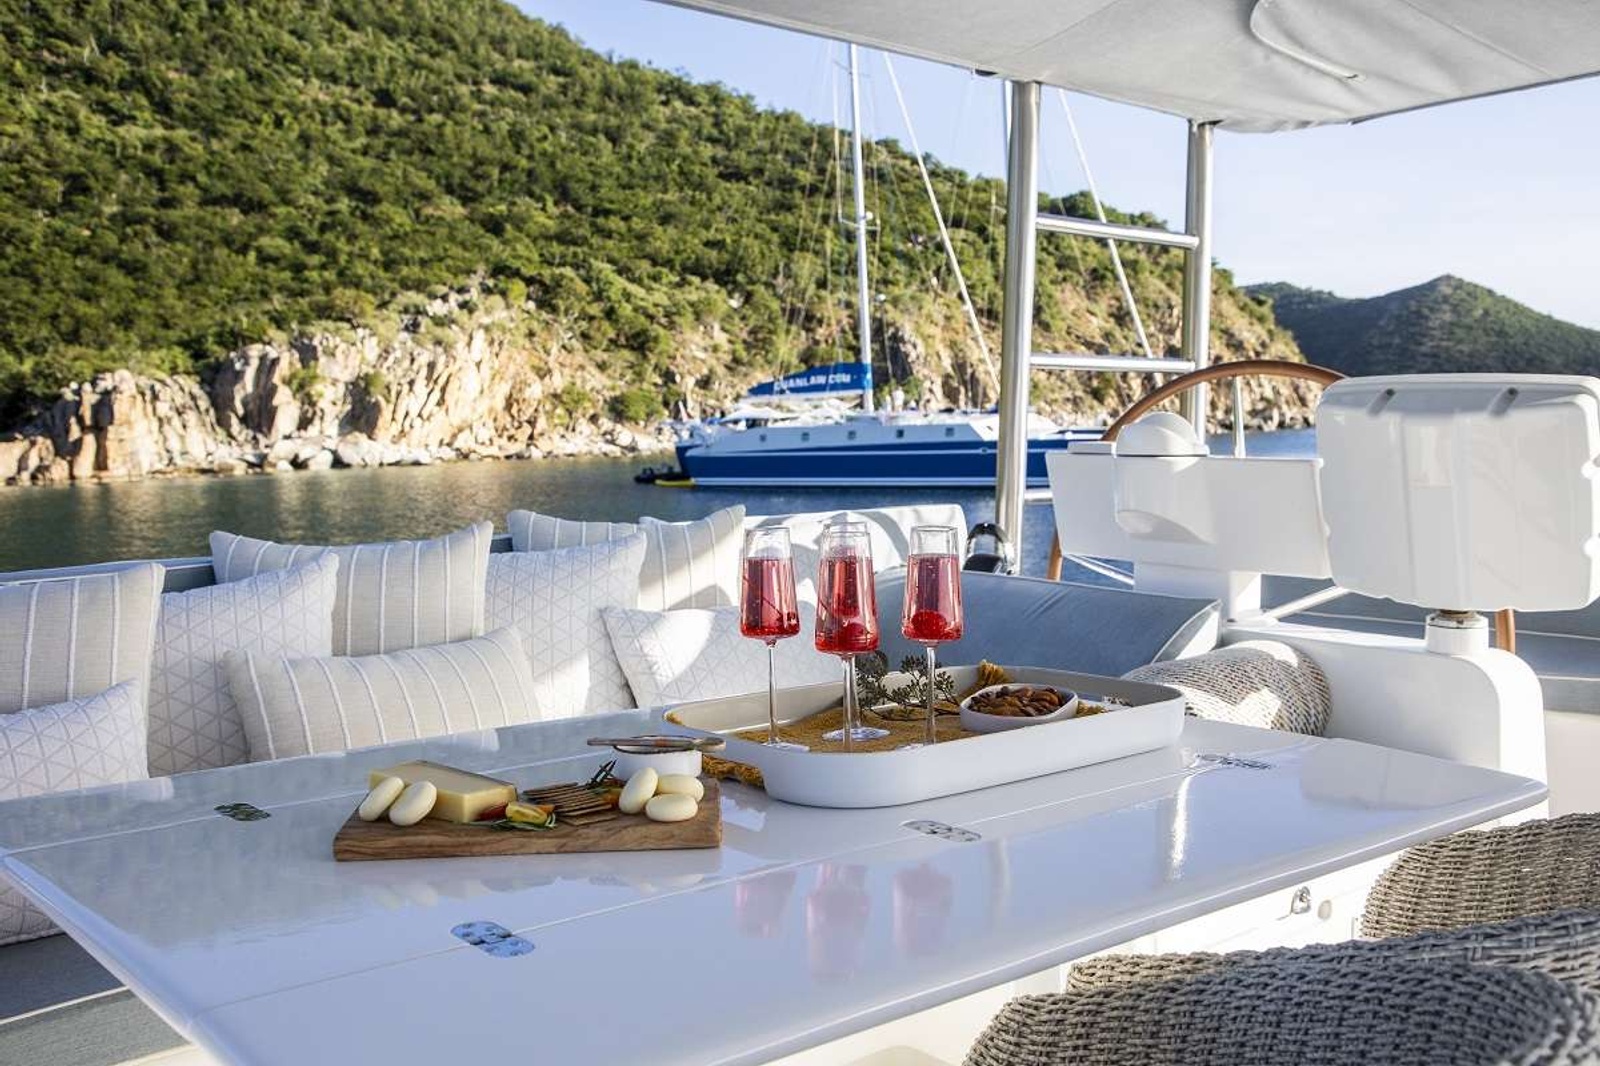 Wine and dine with a view on the stylish flydeck